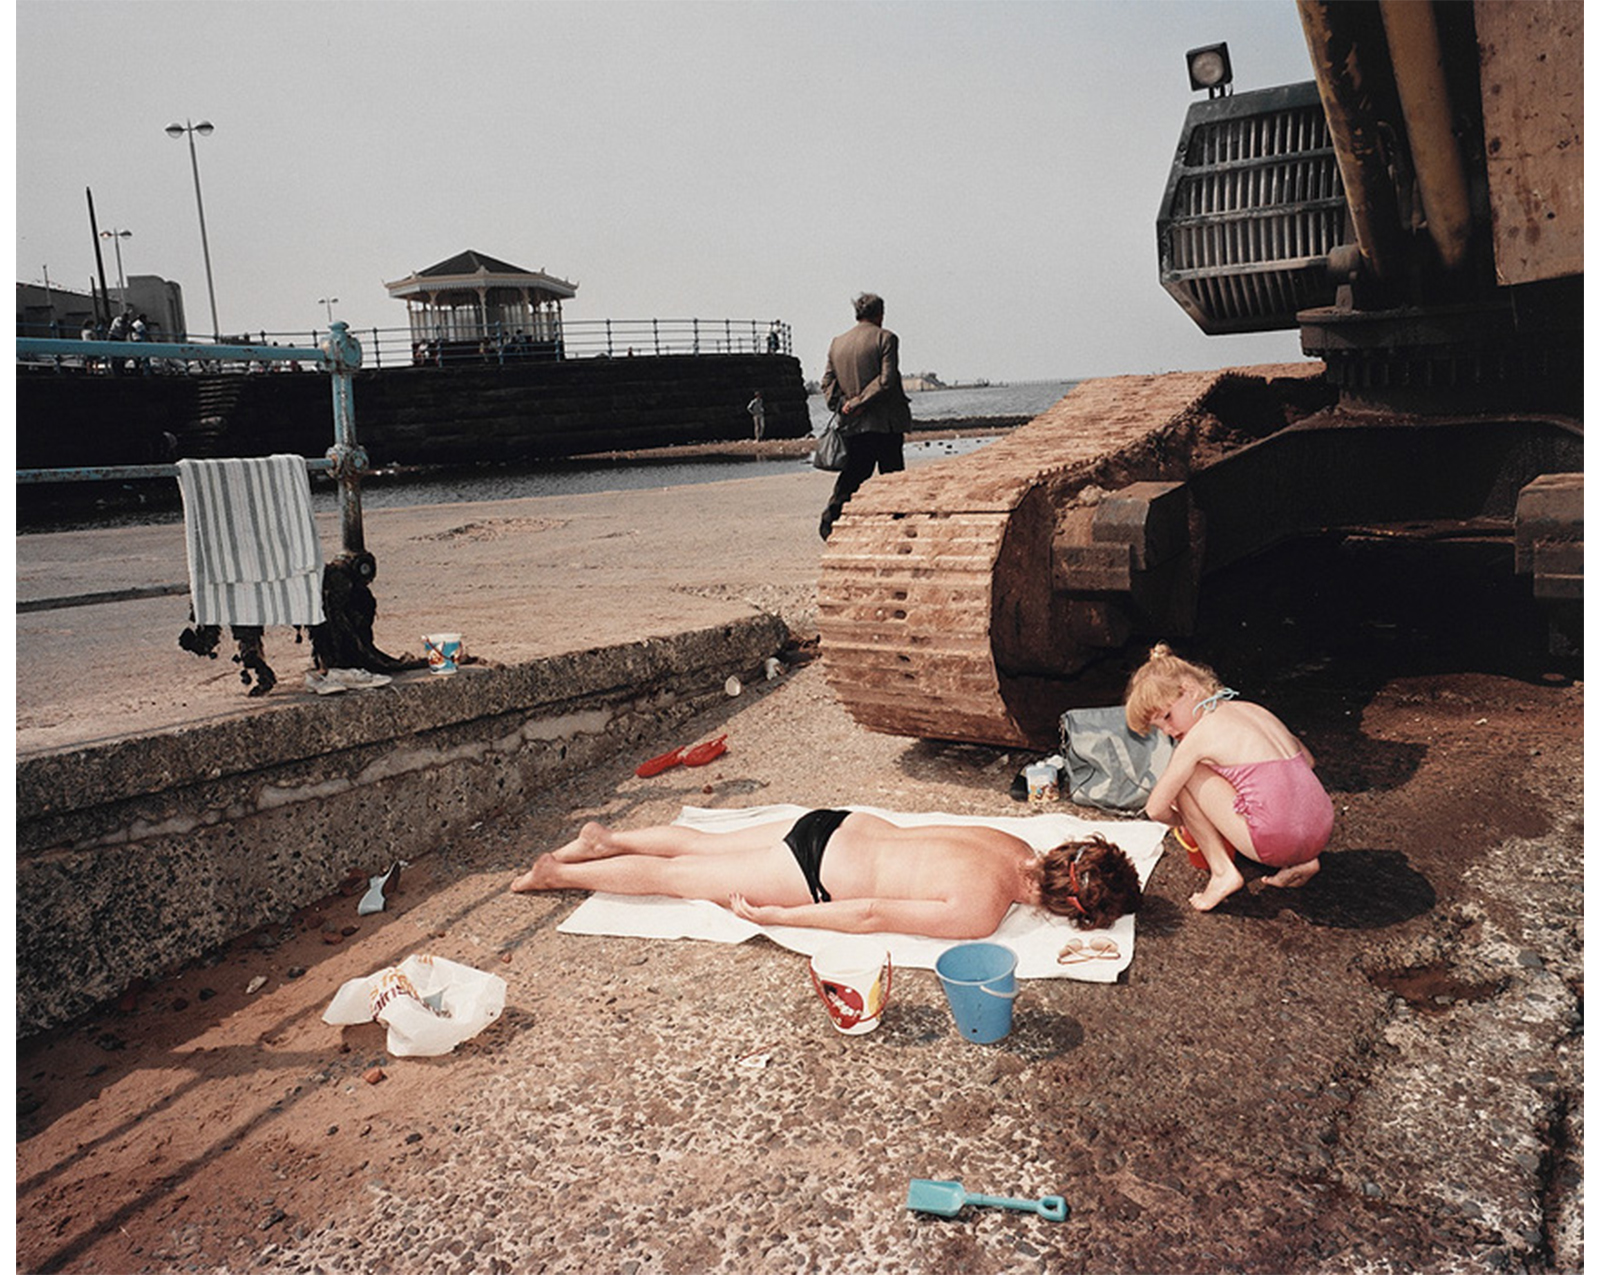 beach, walkway visible in back left with lights, small building and people, man wearing jacket walking toward water in center holding a bag, rusty tank at left edge with woman on her stomach on a white blanket sunbathing topless, a blond child in pink bathing suit crouching beside her holding a sand pail